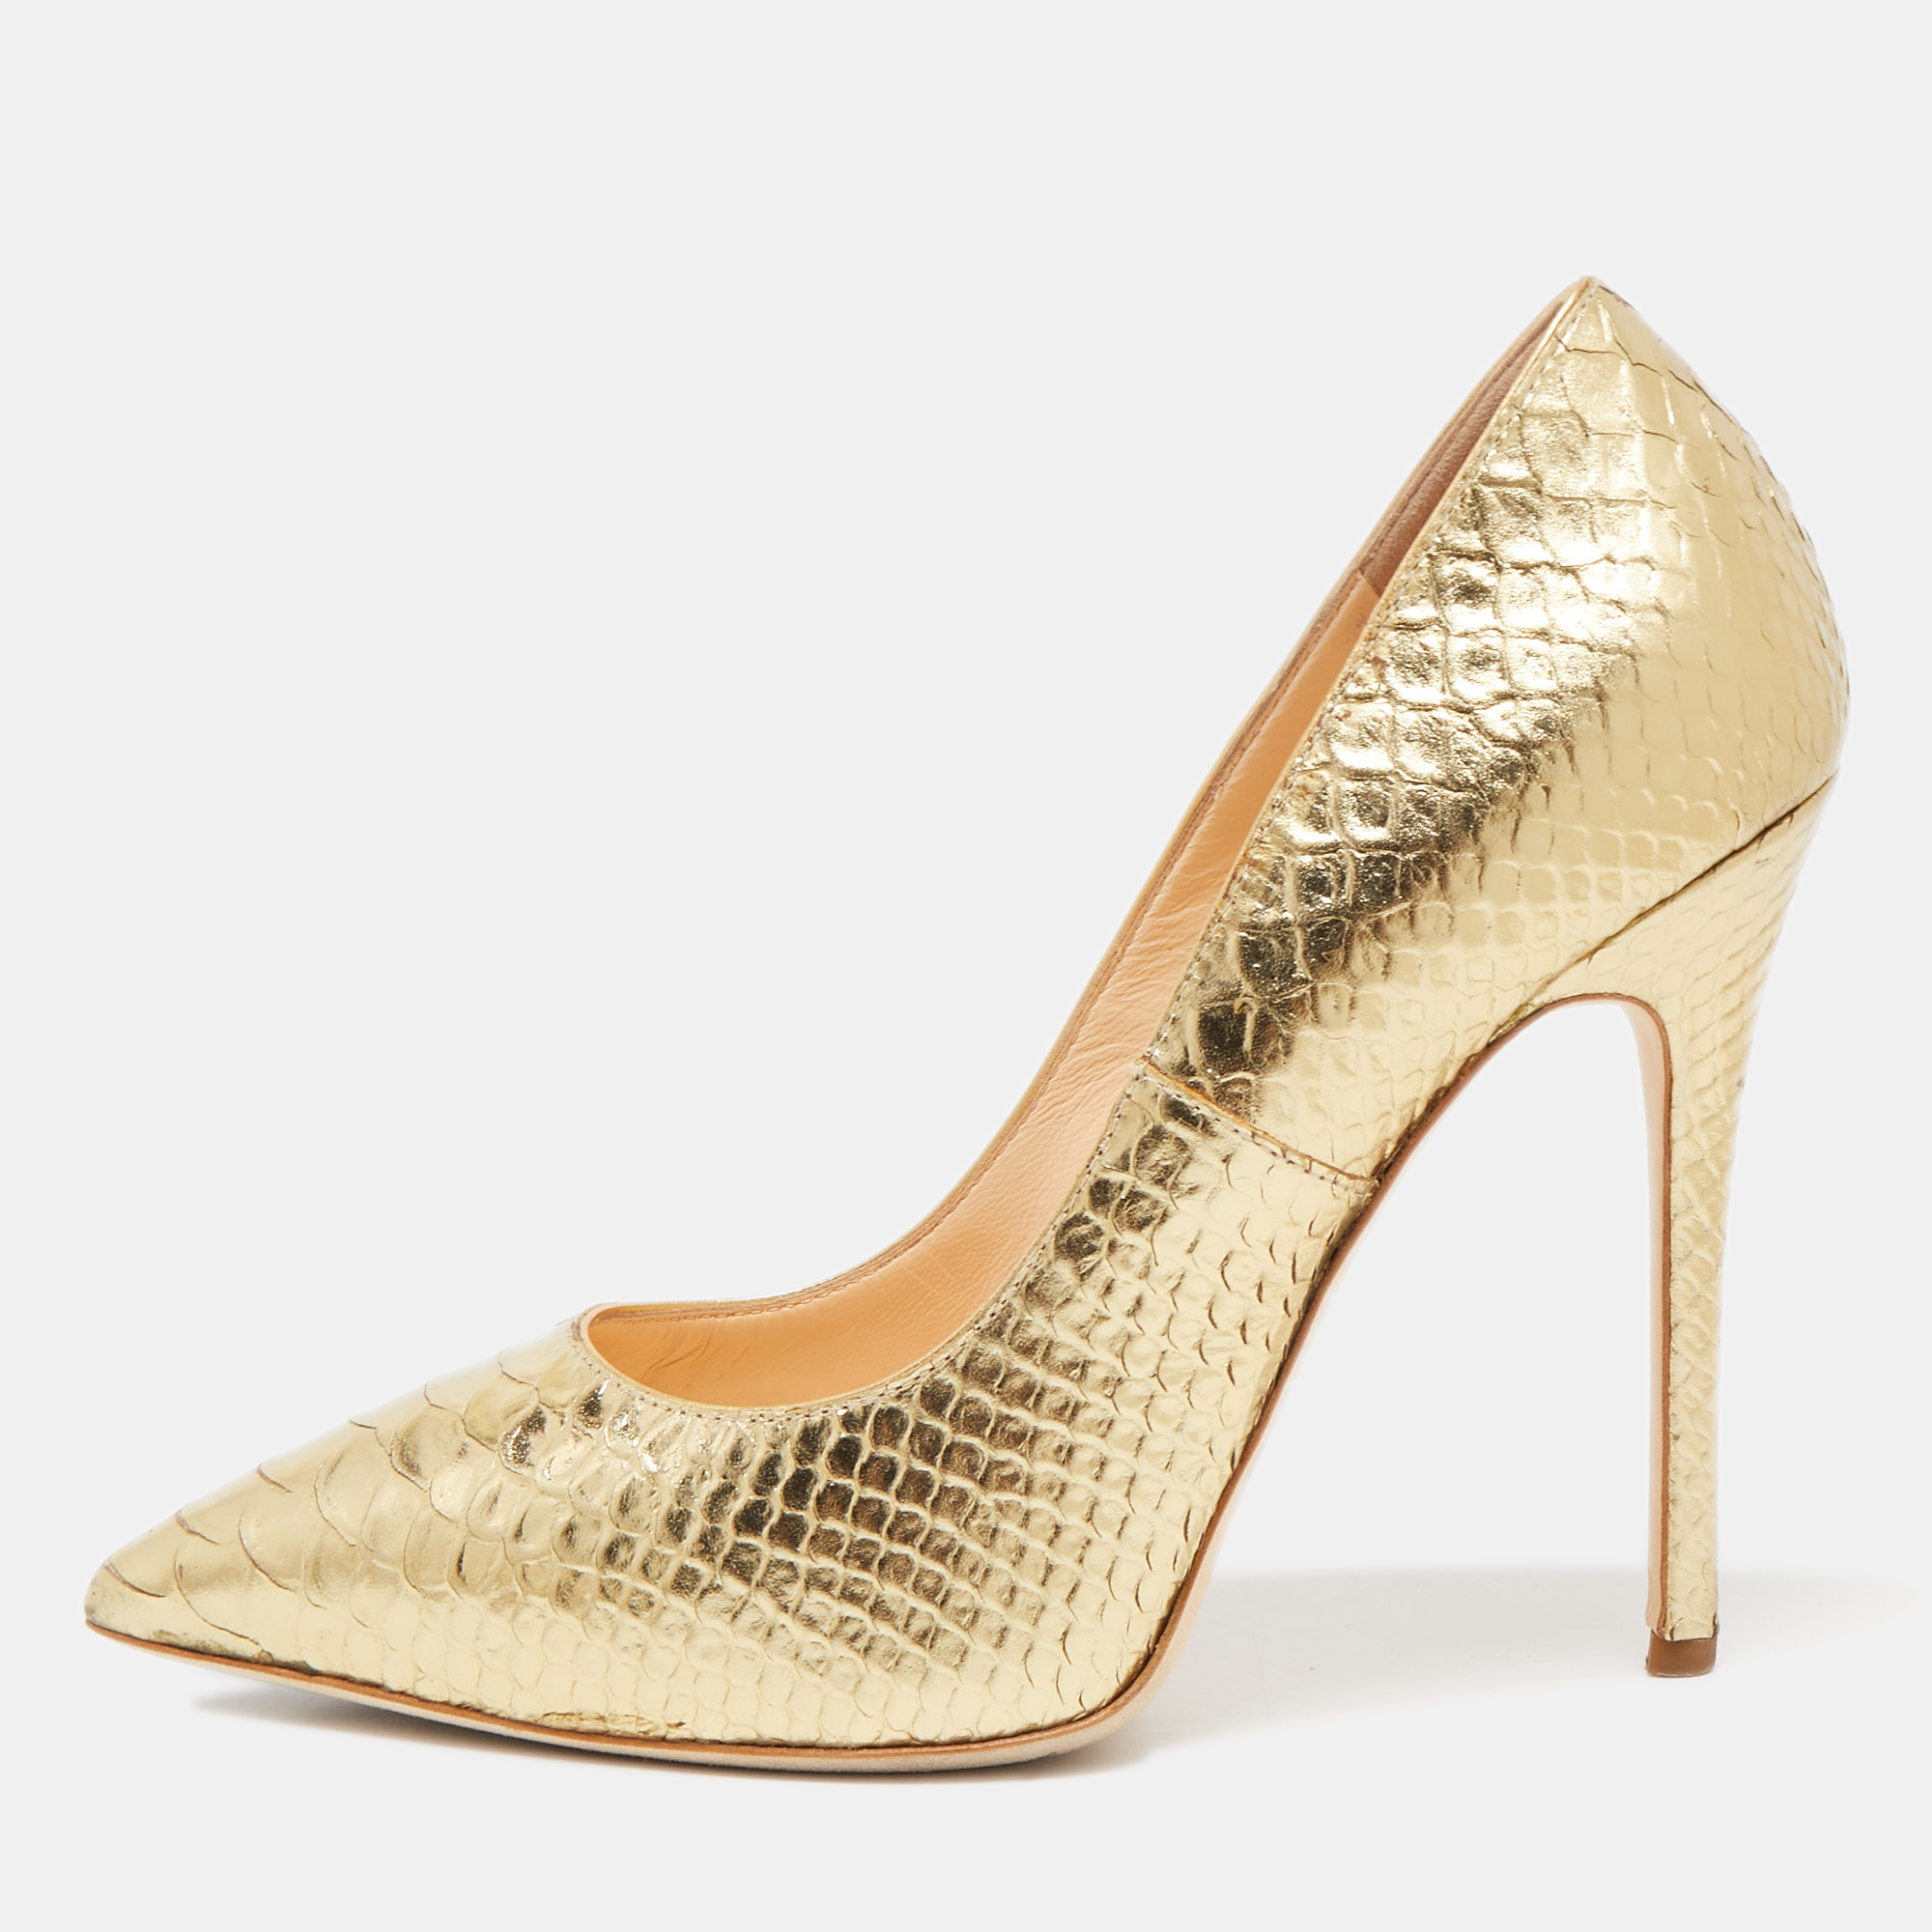 Pre-owned Giuseppe Zanotti Gold Python Embossed Pointed Toe Pumps Size 37.5